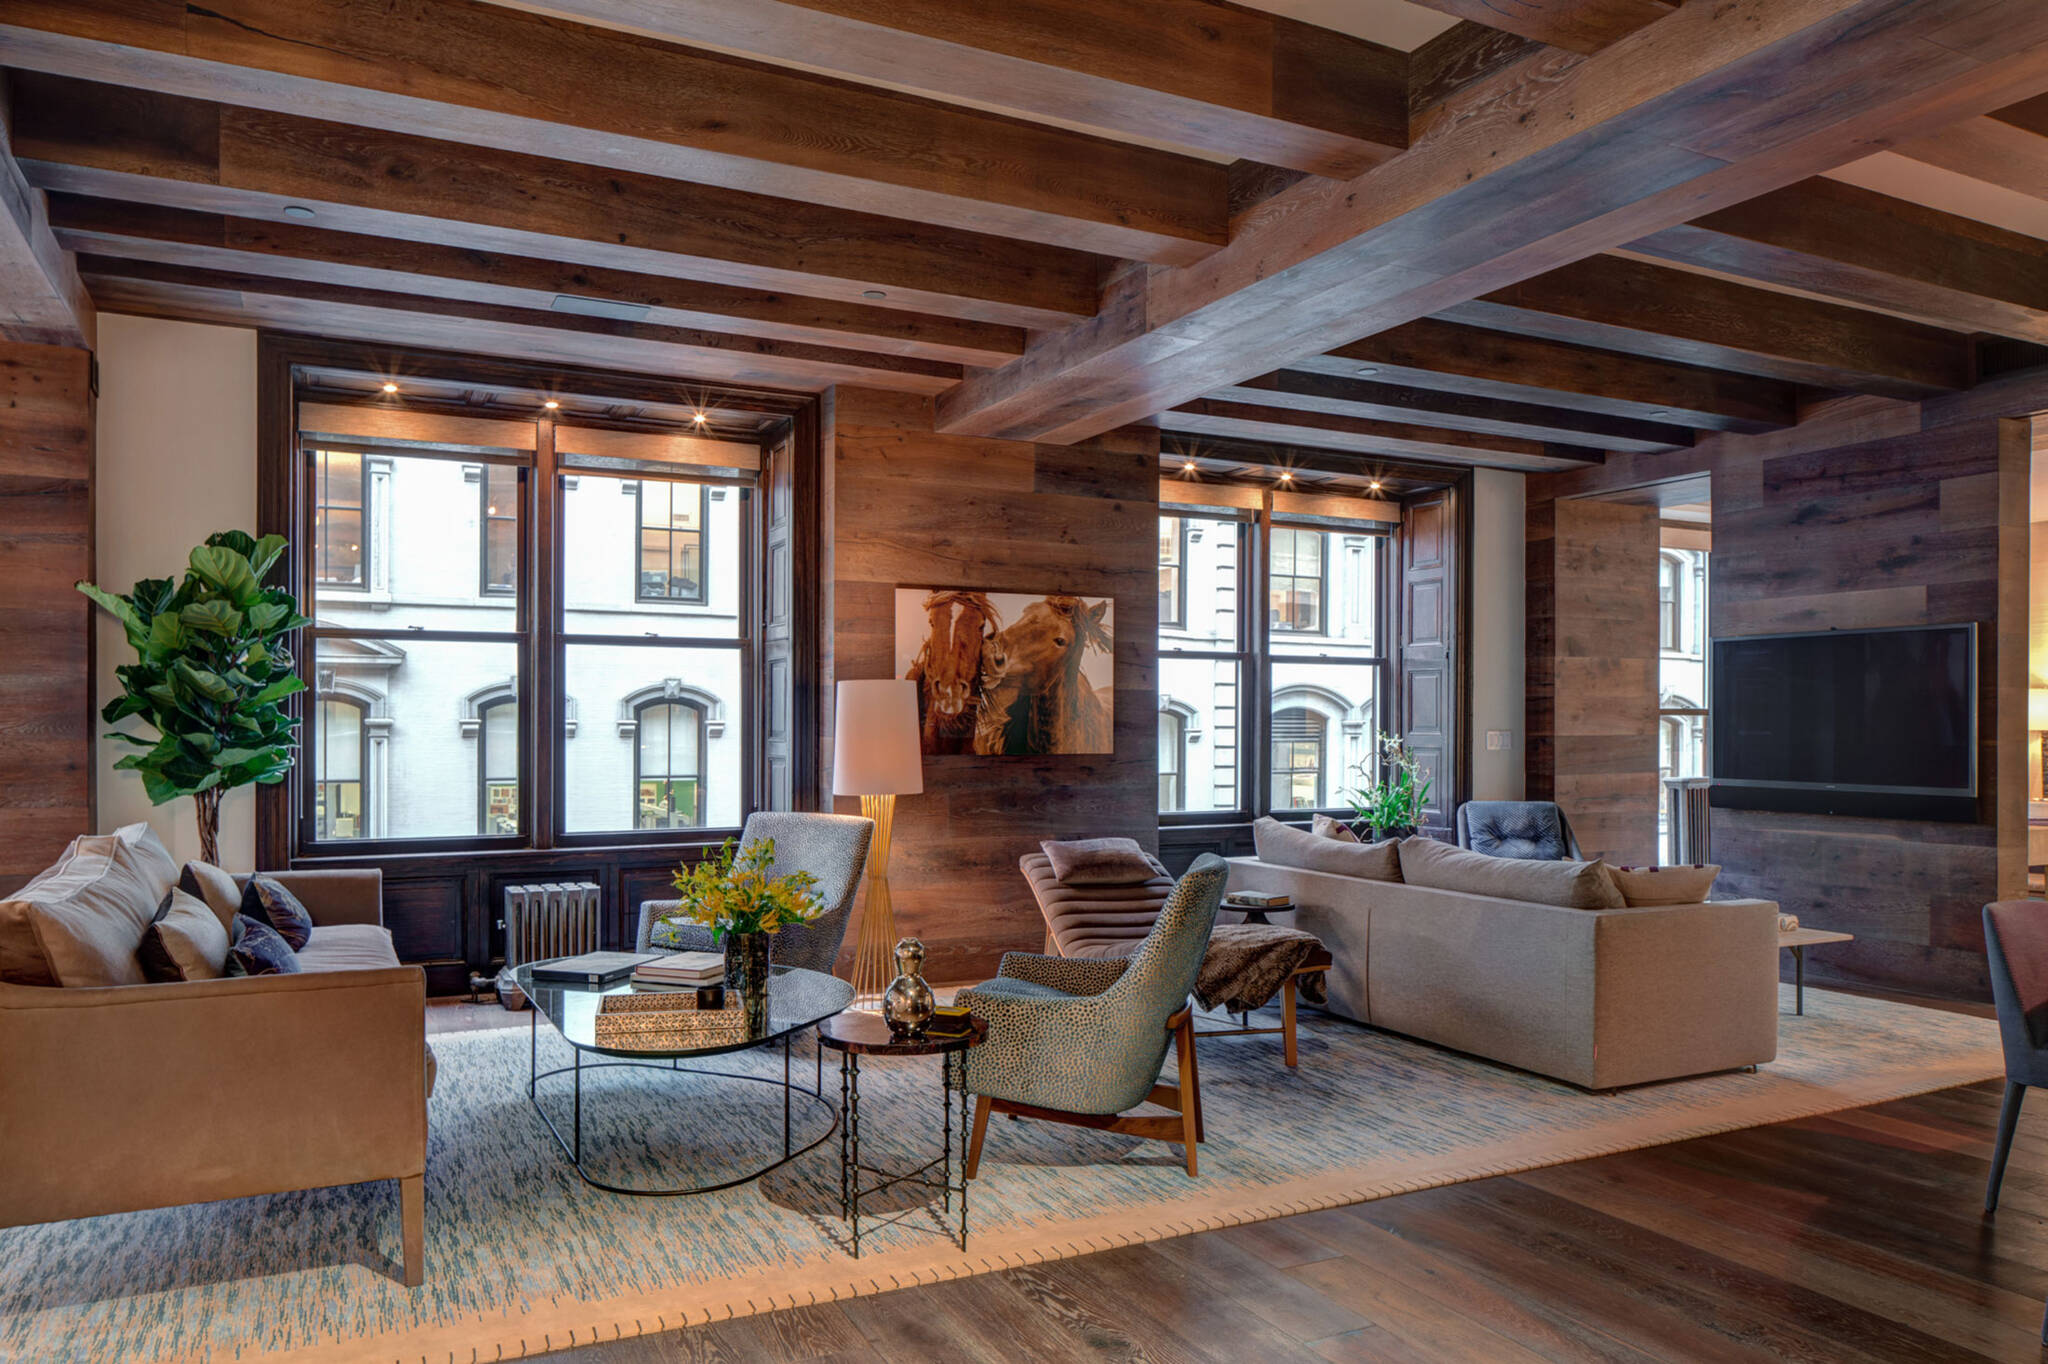 Living room under the wooden beam and cross beams ceiling of the loft renovation project in Union Square, New York City designed by the architecture studio Danny Forster & Architecture